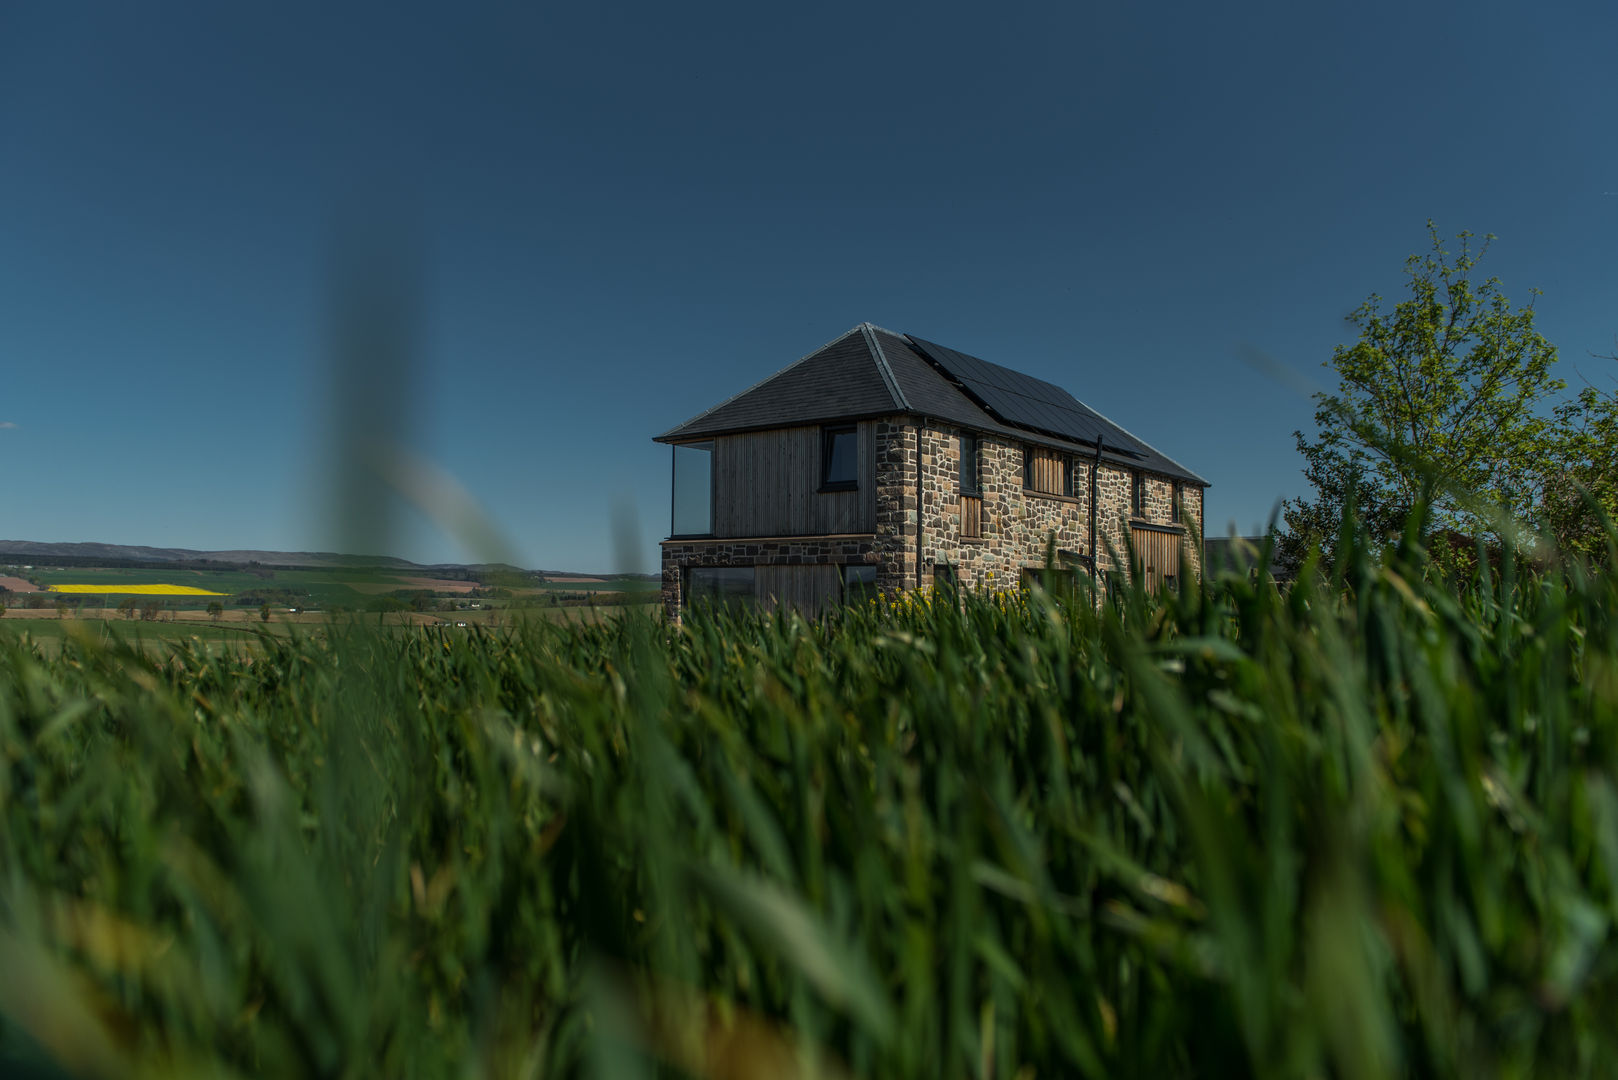 The house sits in its rural landscape like the former steading would have Woodside Parker Kirk Architects Rustic style house Farm steading,development,Stone,Timber,Glass corner,Glass to glass,solar cells,Renewables